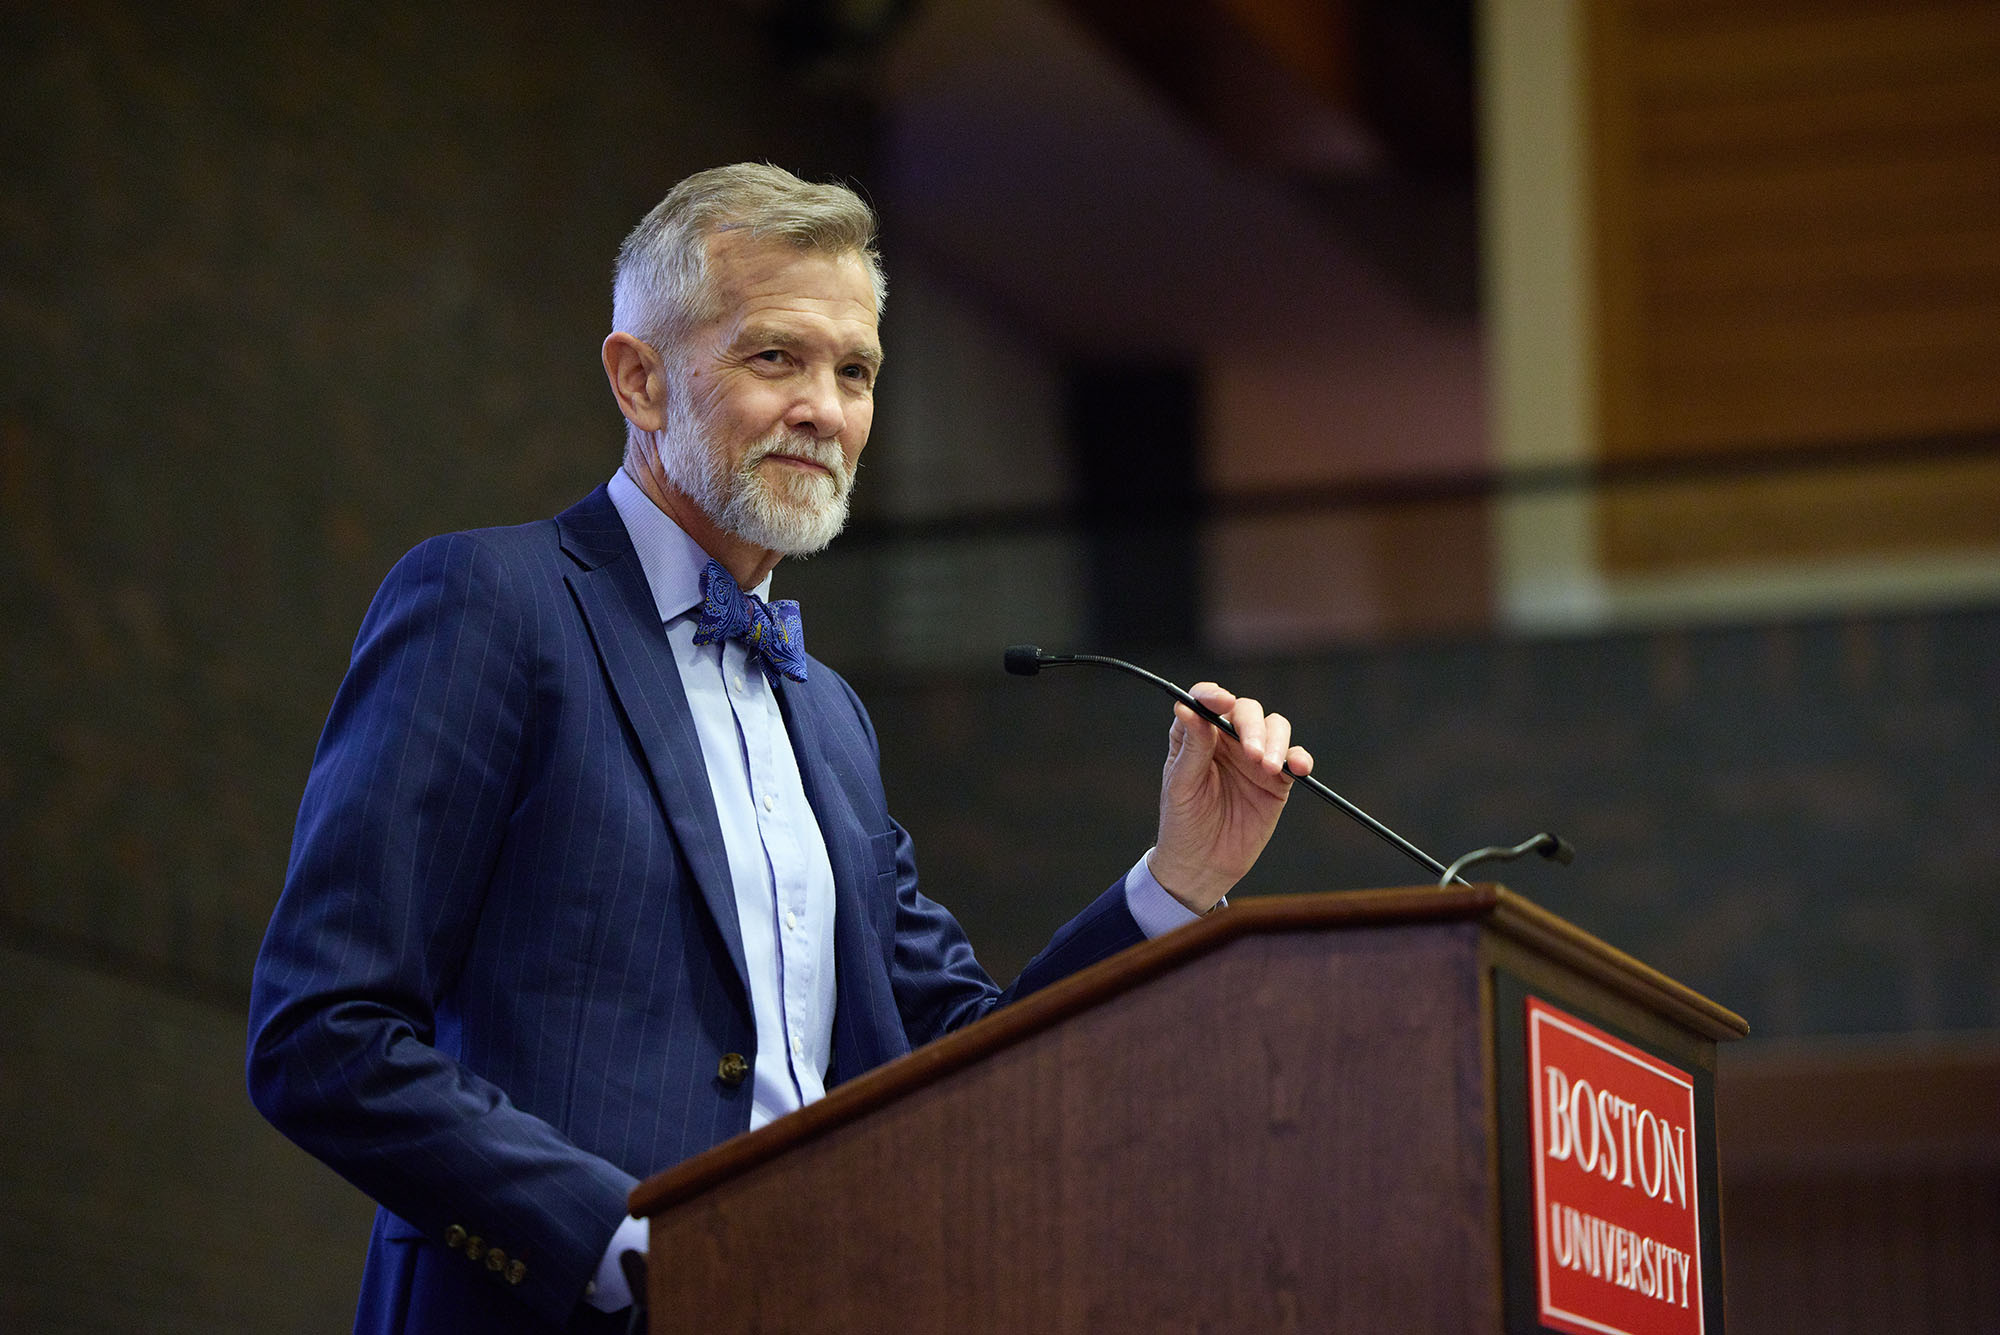 Photo: David Chard, a white man with short gray hair and short gray beard. He wears a blue suit and maroon tie, smiles and stands at a wooden podium with a red "Boston University" sign on it. He holds a small microphone in one hand as he looks to an unseen audience.